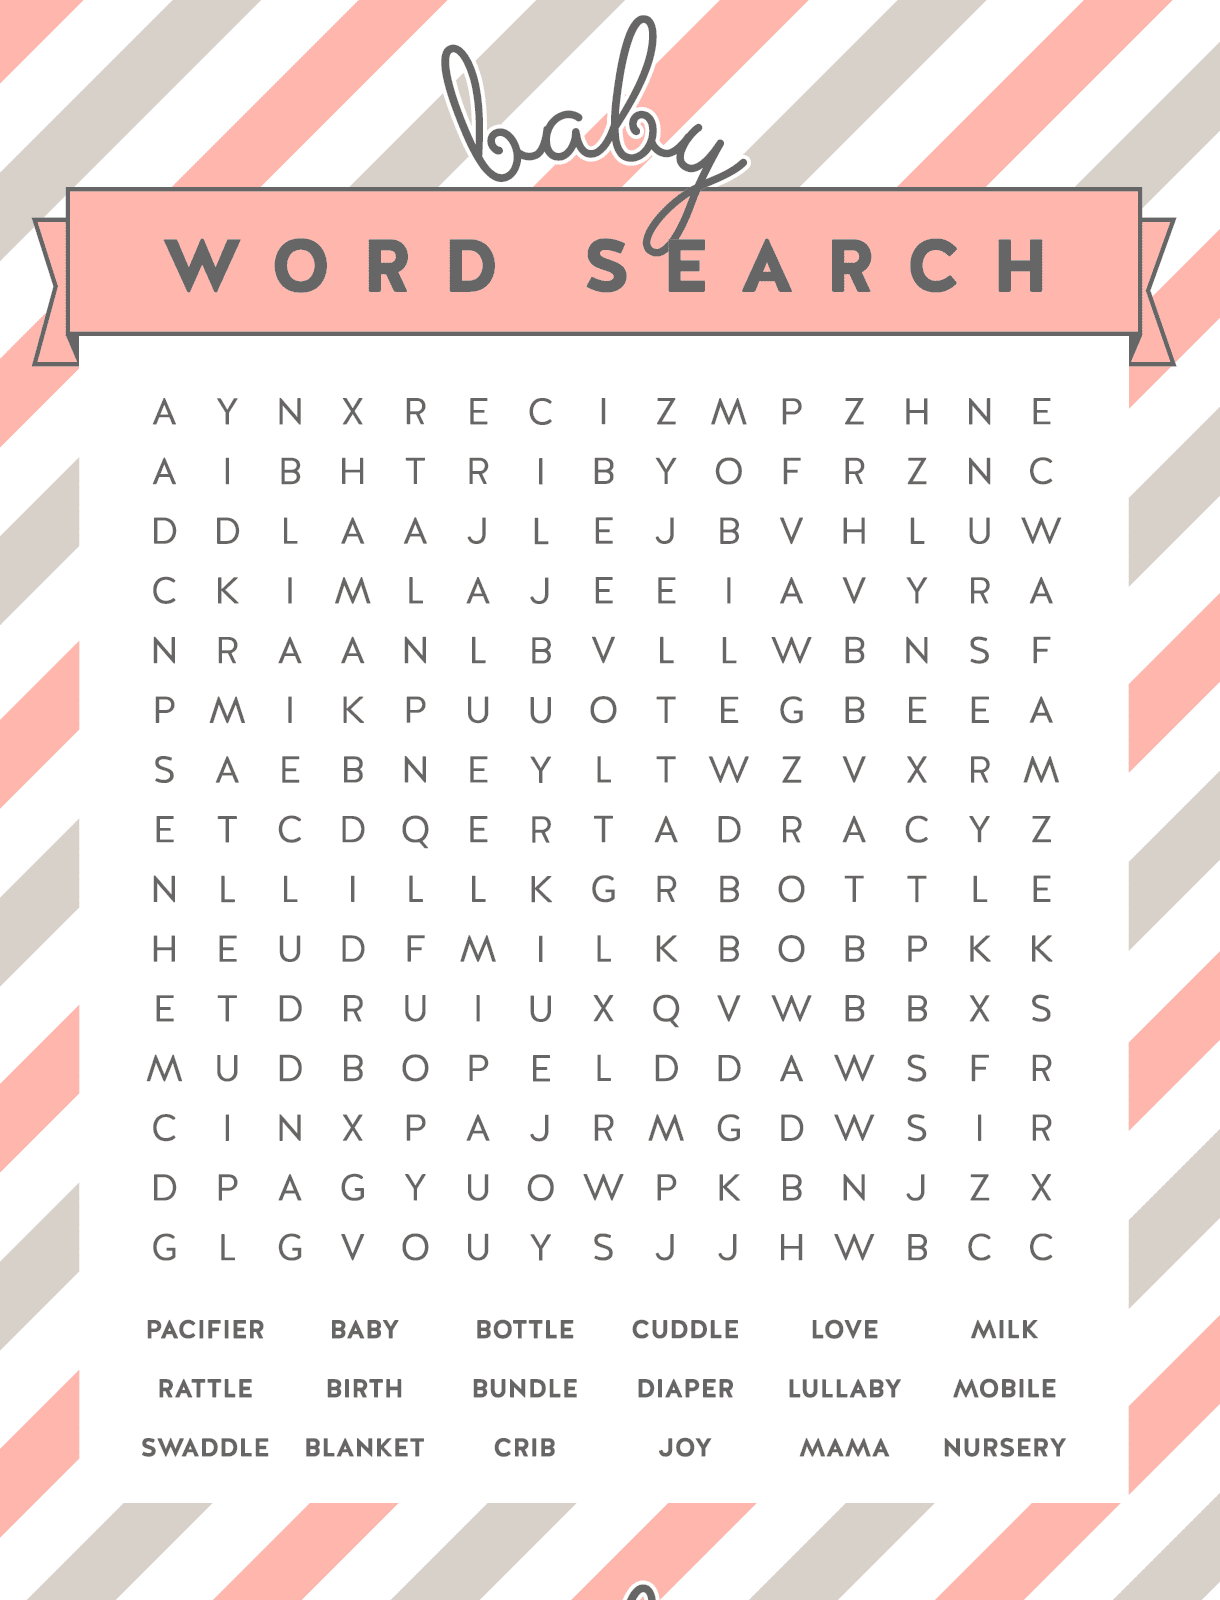 Free Baby Shower Word Search Puzzles - Free Online Printable Word Search